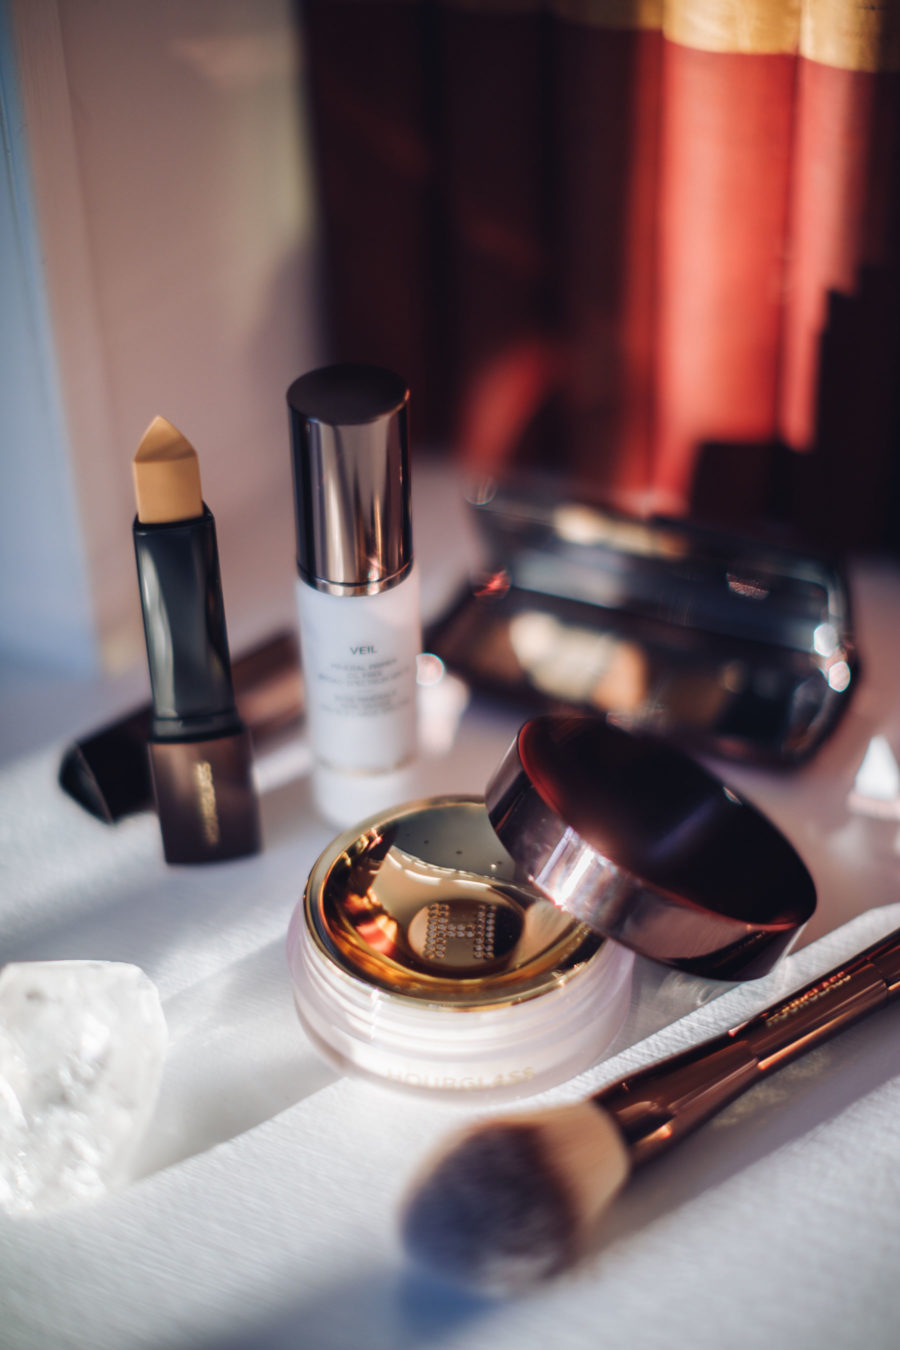 my top beauty picks from the 2020 nordstrom anniversary sale - Hourglass cosmetics, hourglass makeup tutorial, holiday makeup tutorial, hourglass Veil Translucent Setting Powder// Jessica Wang - Notjessfashion.com